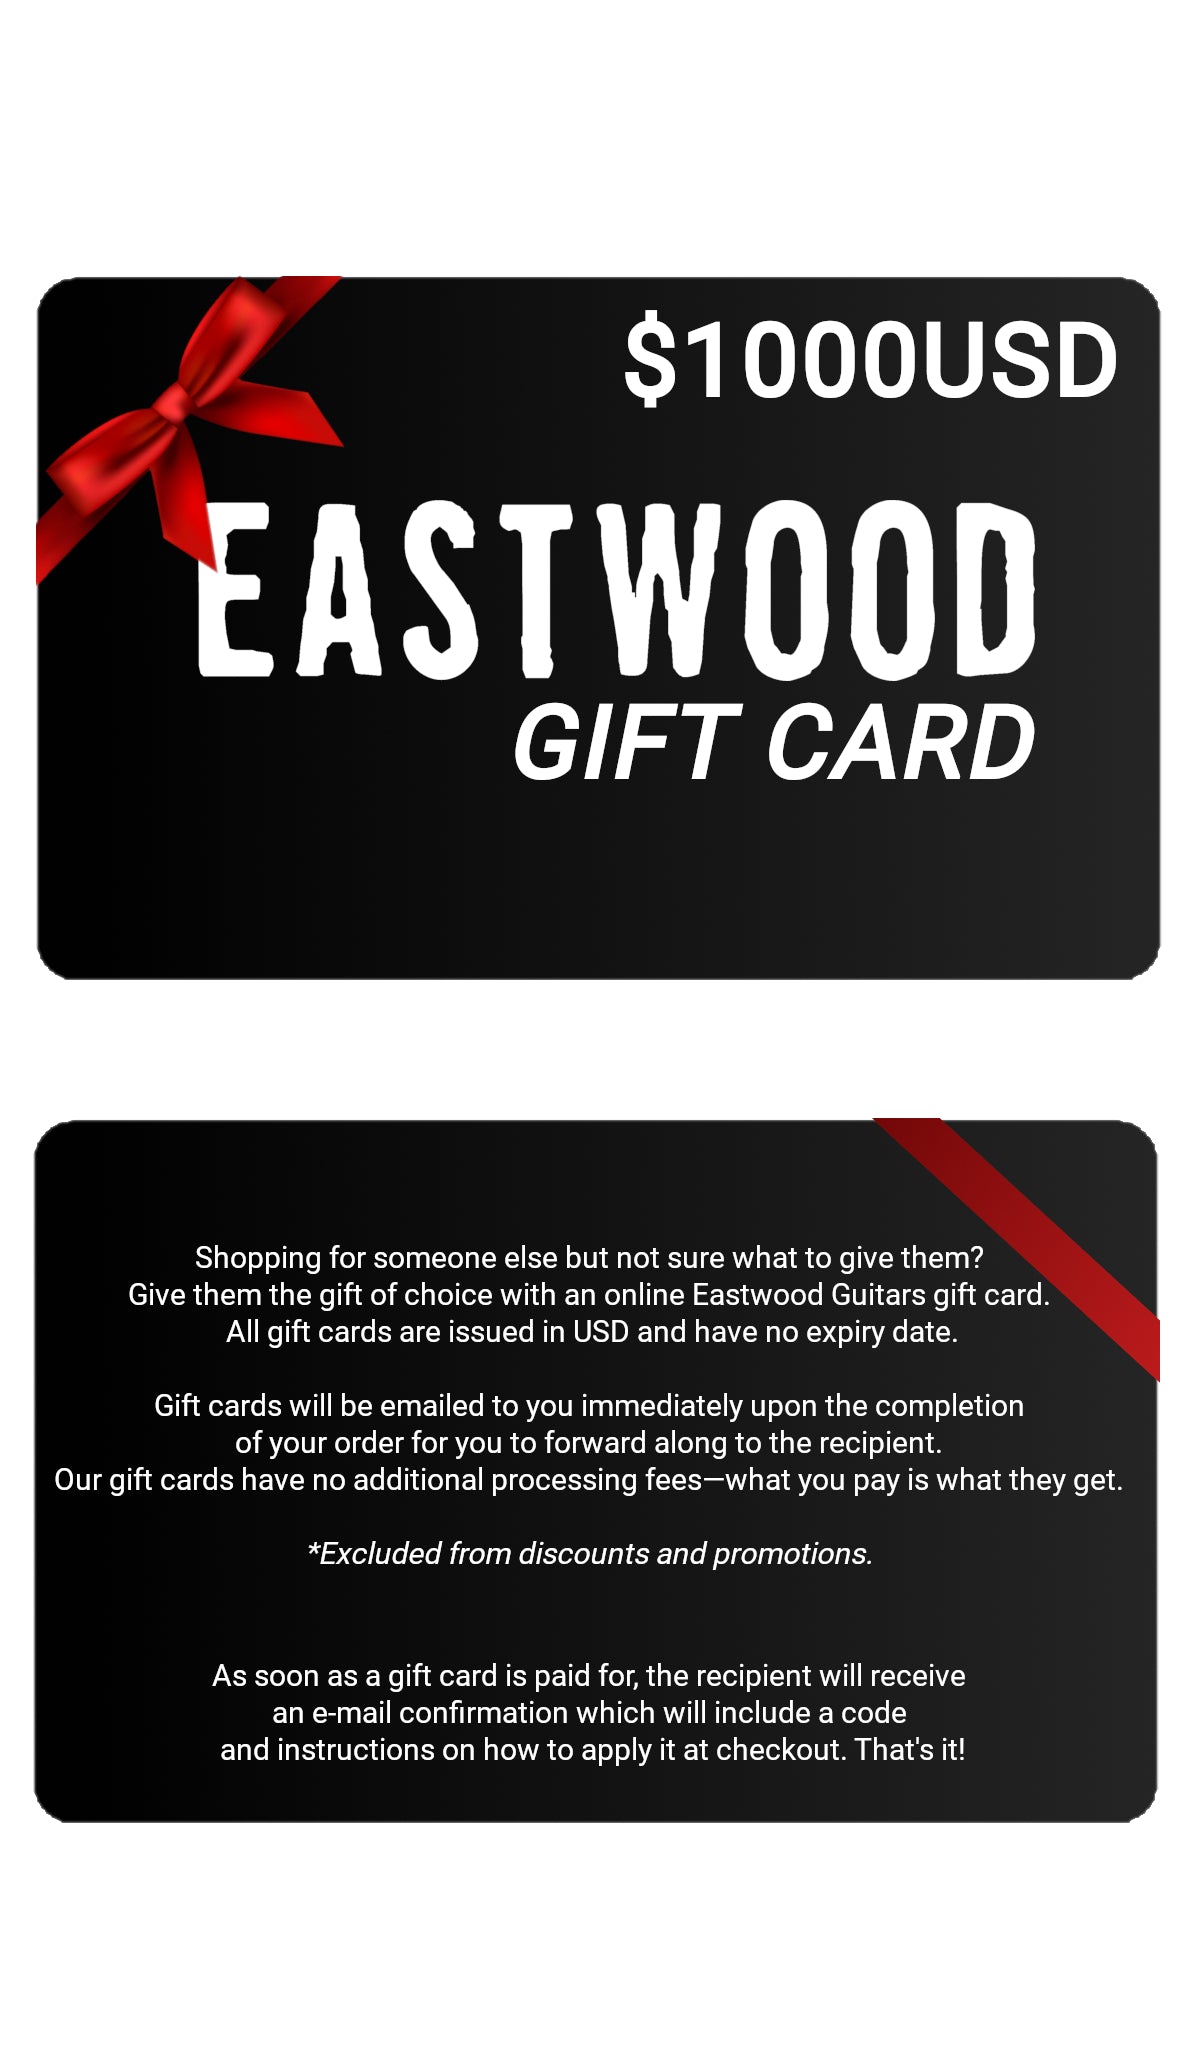 Eastwood Guitars Eastwood Gift Cards $1000